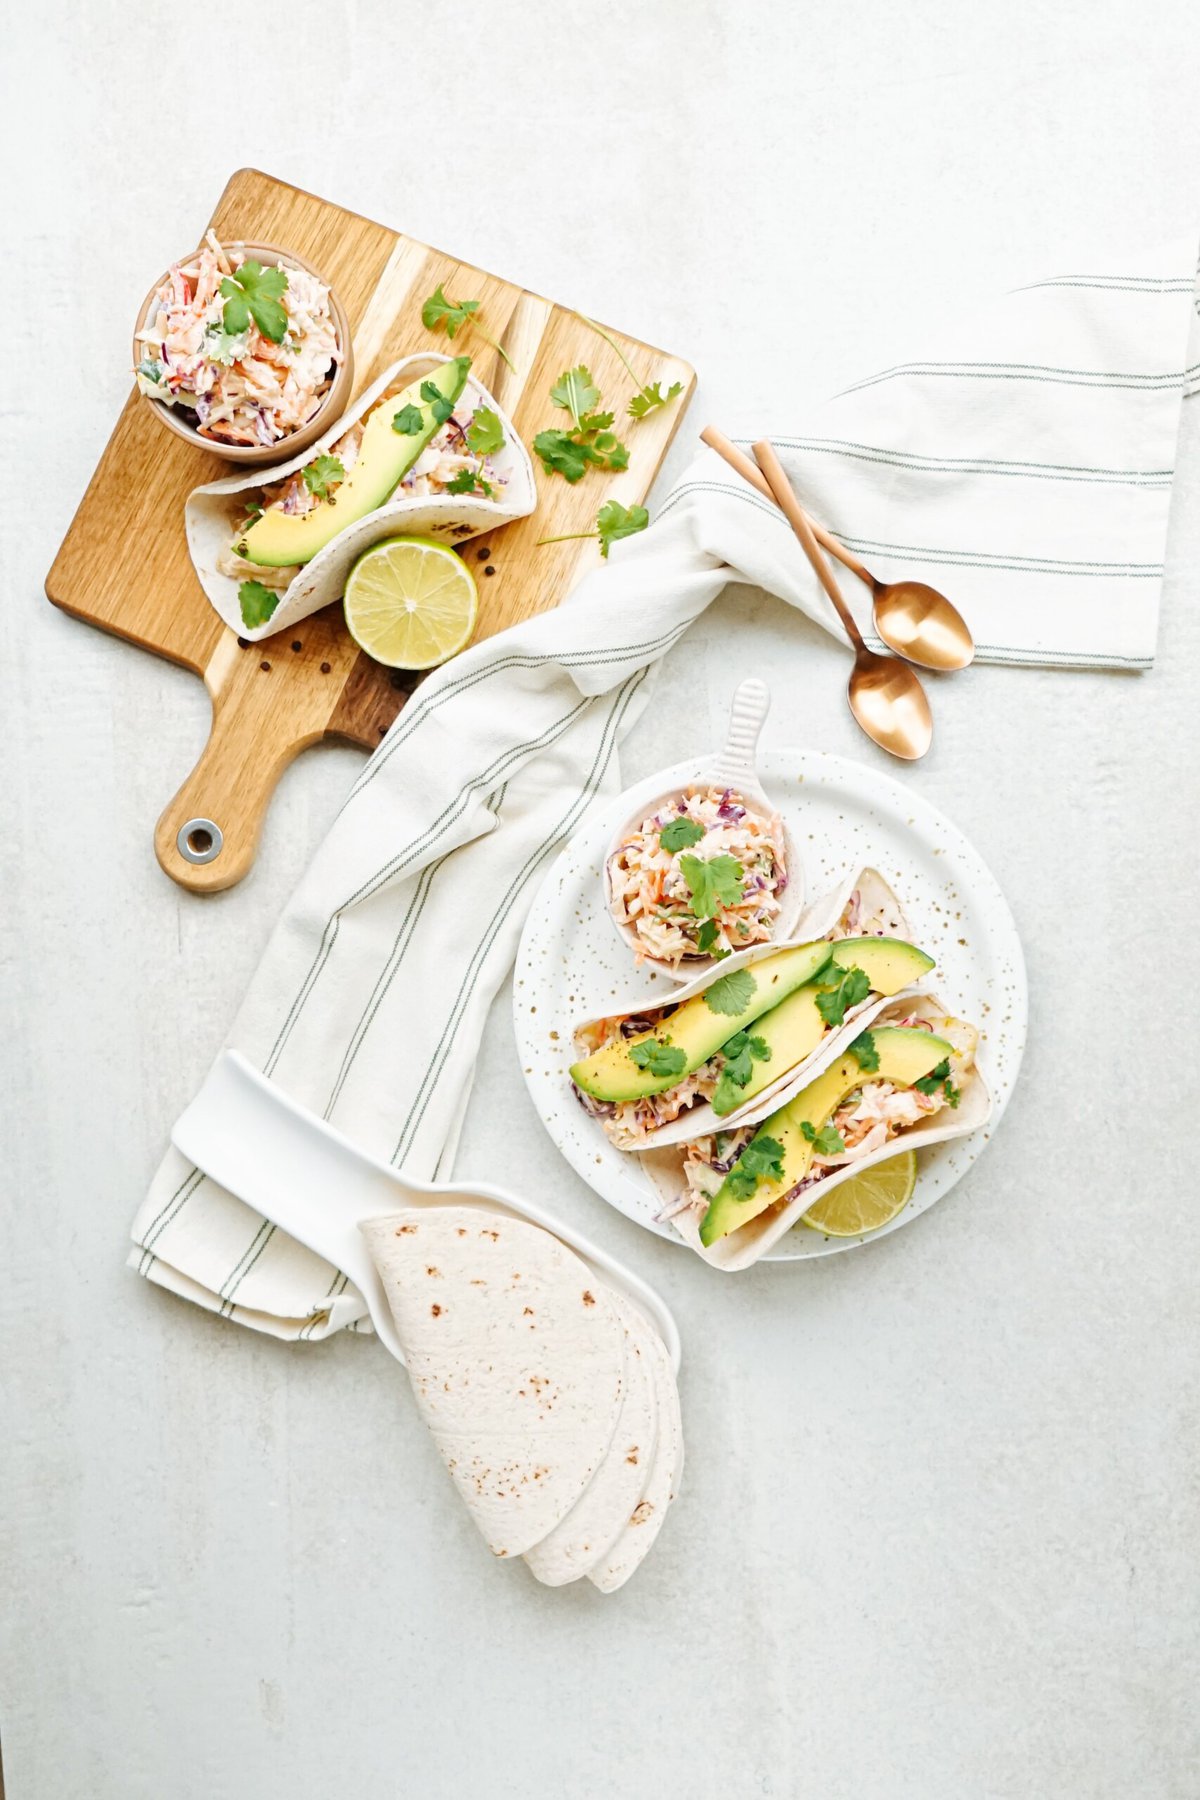 A spread of fish tacos and a bowl of coleslaw on a bright kitchen surface with culinary utensils.